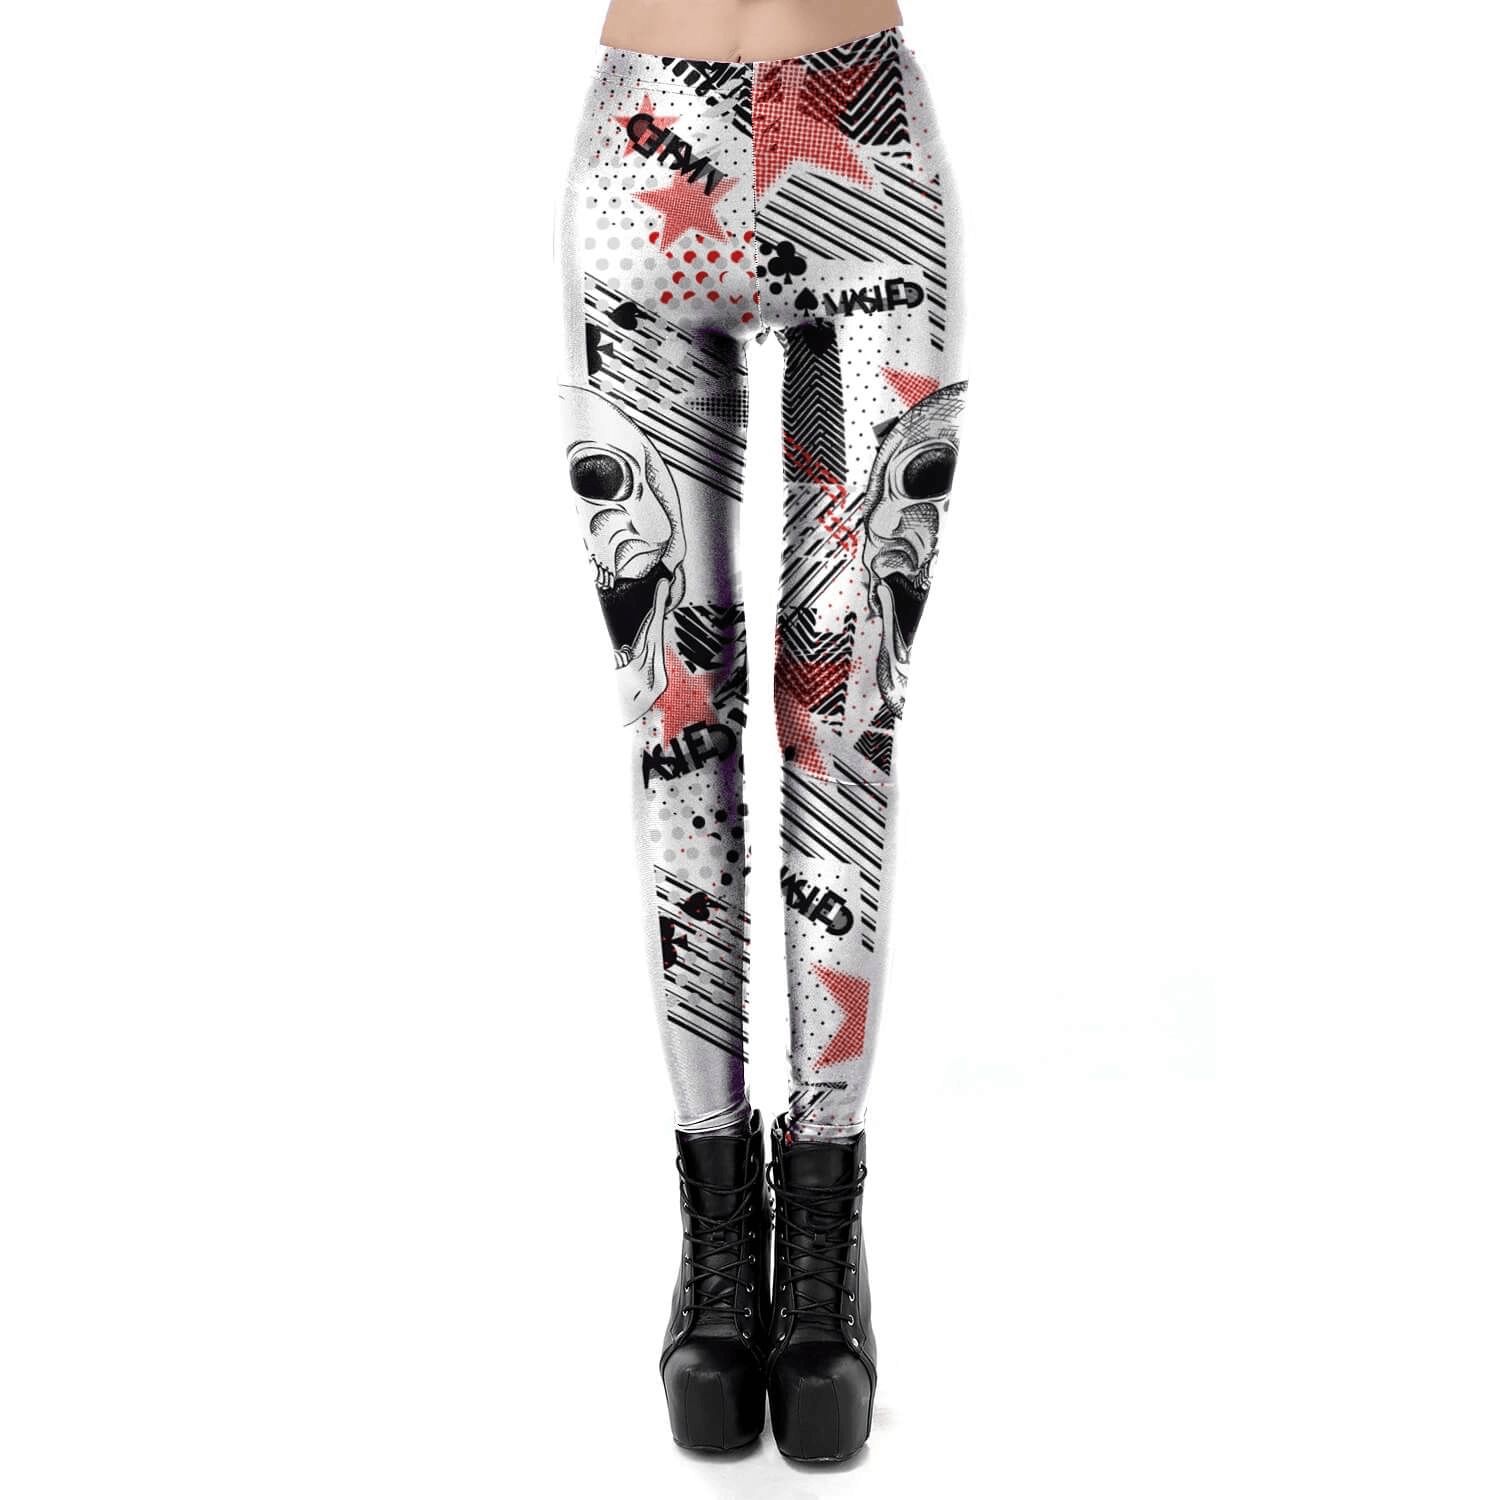 White Classic Female Leggings with Skull for Halloween / Sexy Workout Pants for Women - HARD'N'HEAVY